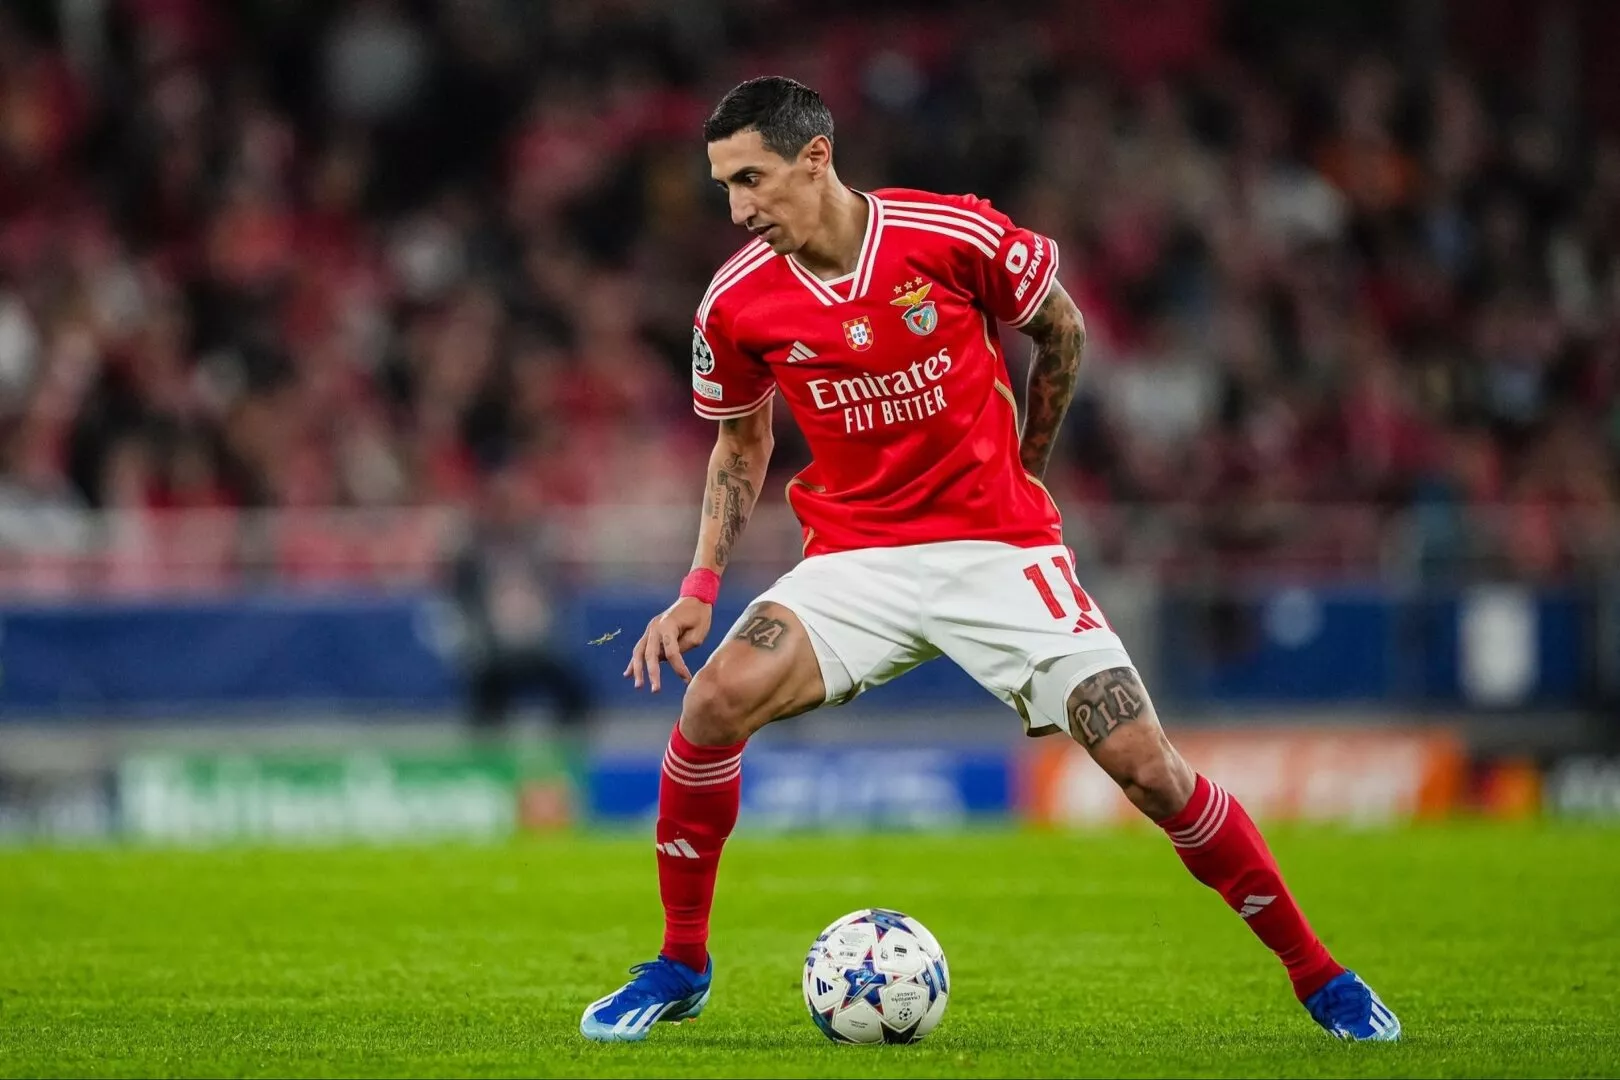 Benfica plans to keep Angel Di Maria for one more season